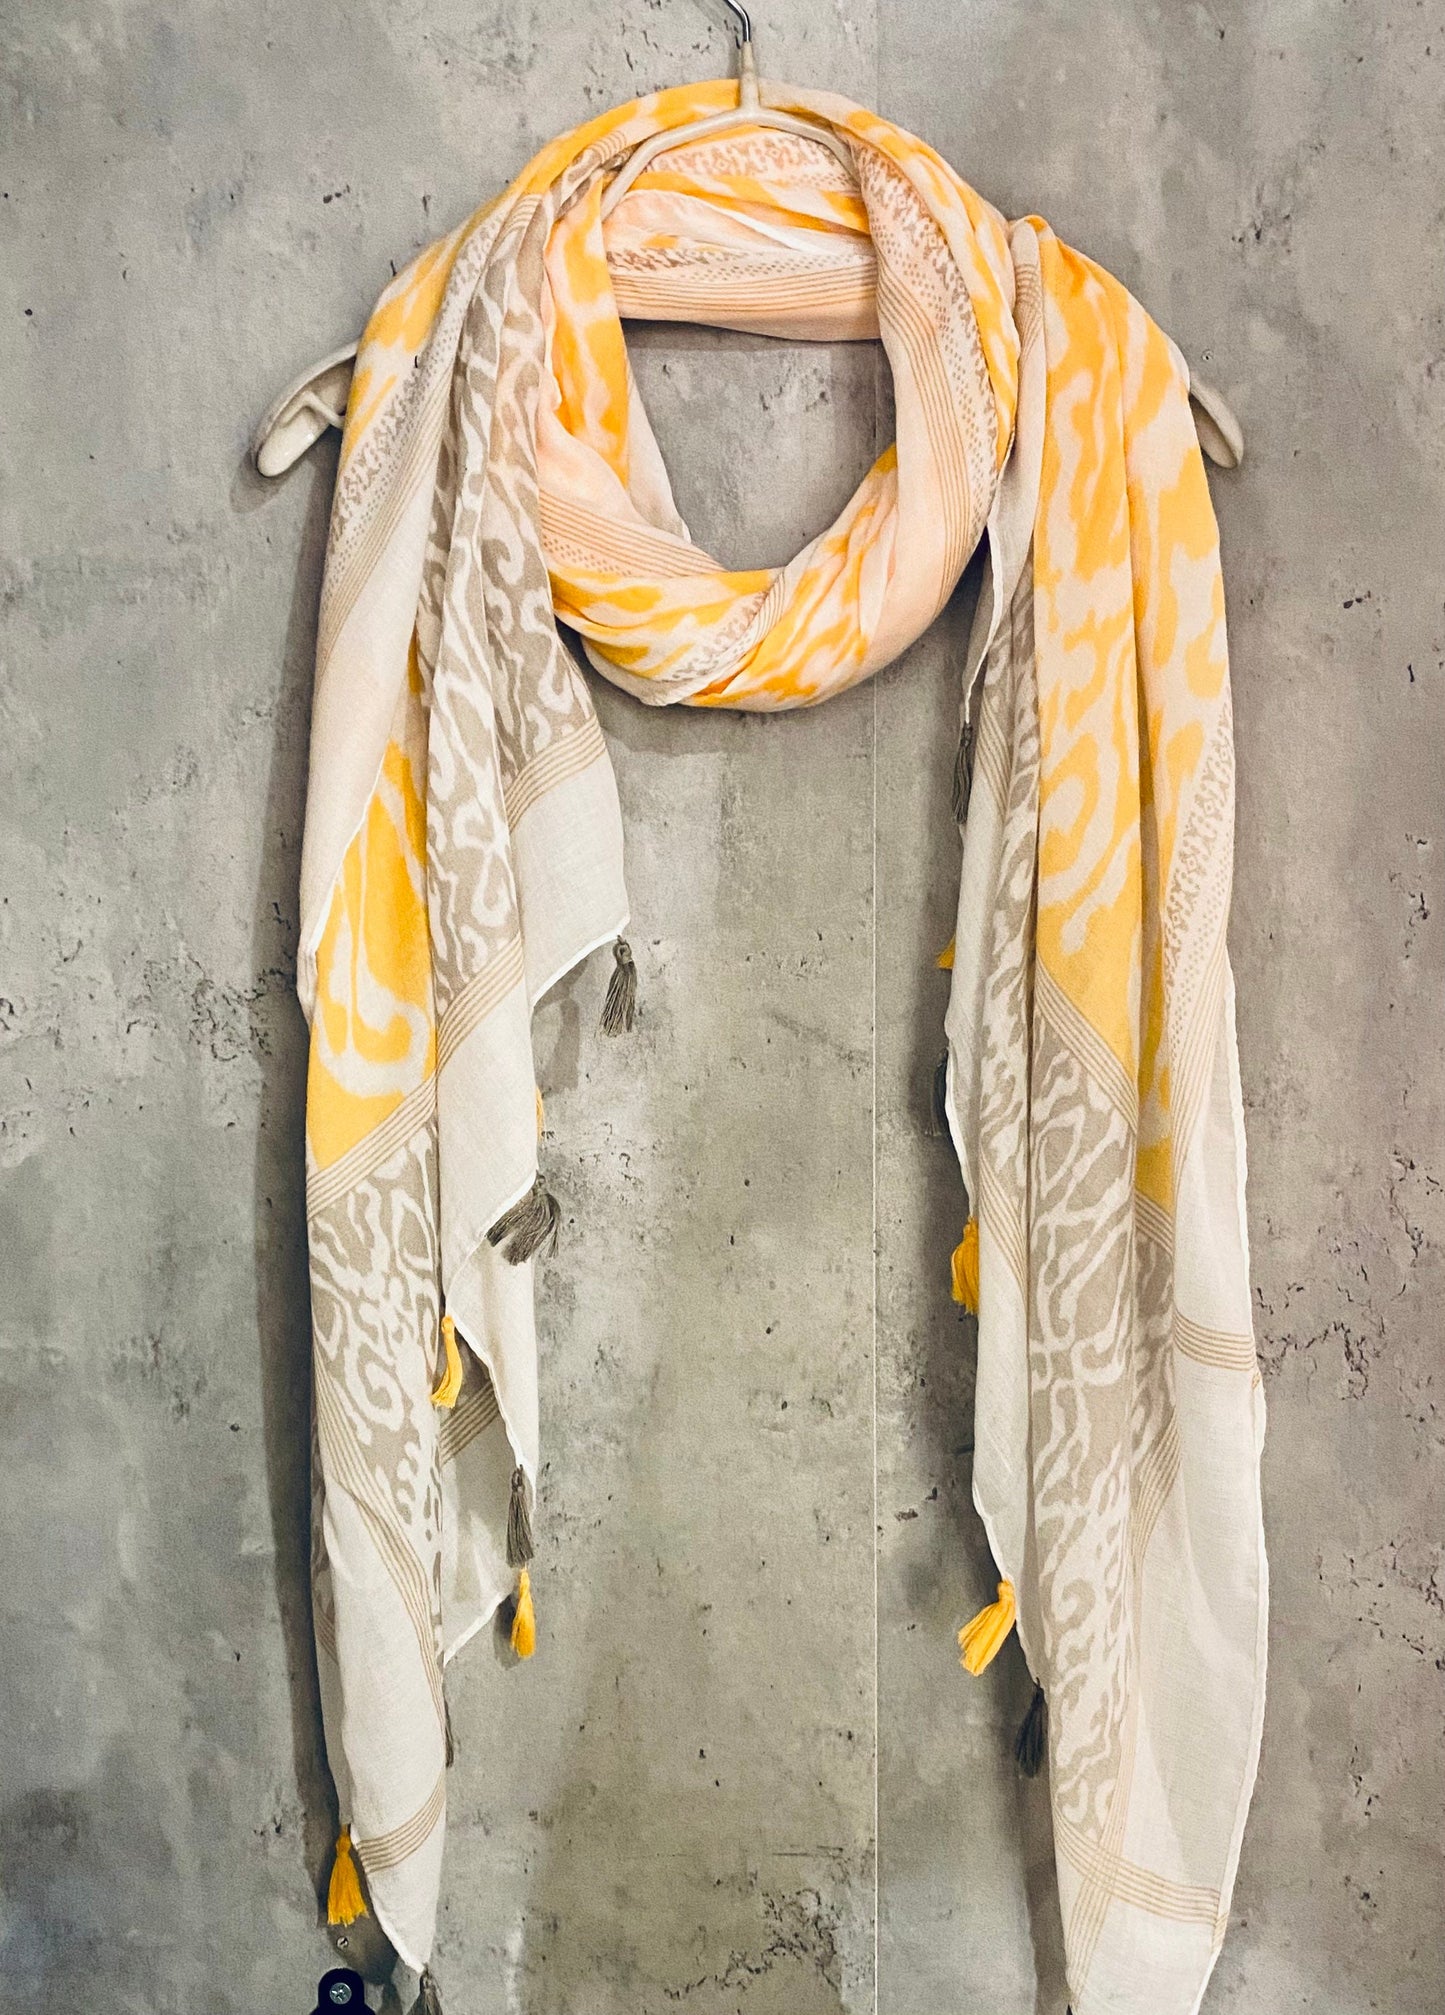 Bohemian Ikat Pattern with Tassels Yellow Beige Cotton Scarf/Spring Summer Scarf/Scarf Women/UK Seller/Gifts For Her Birthday/Gifts For Mom